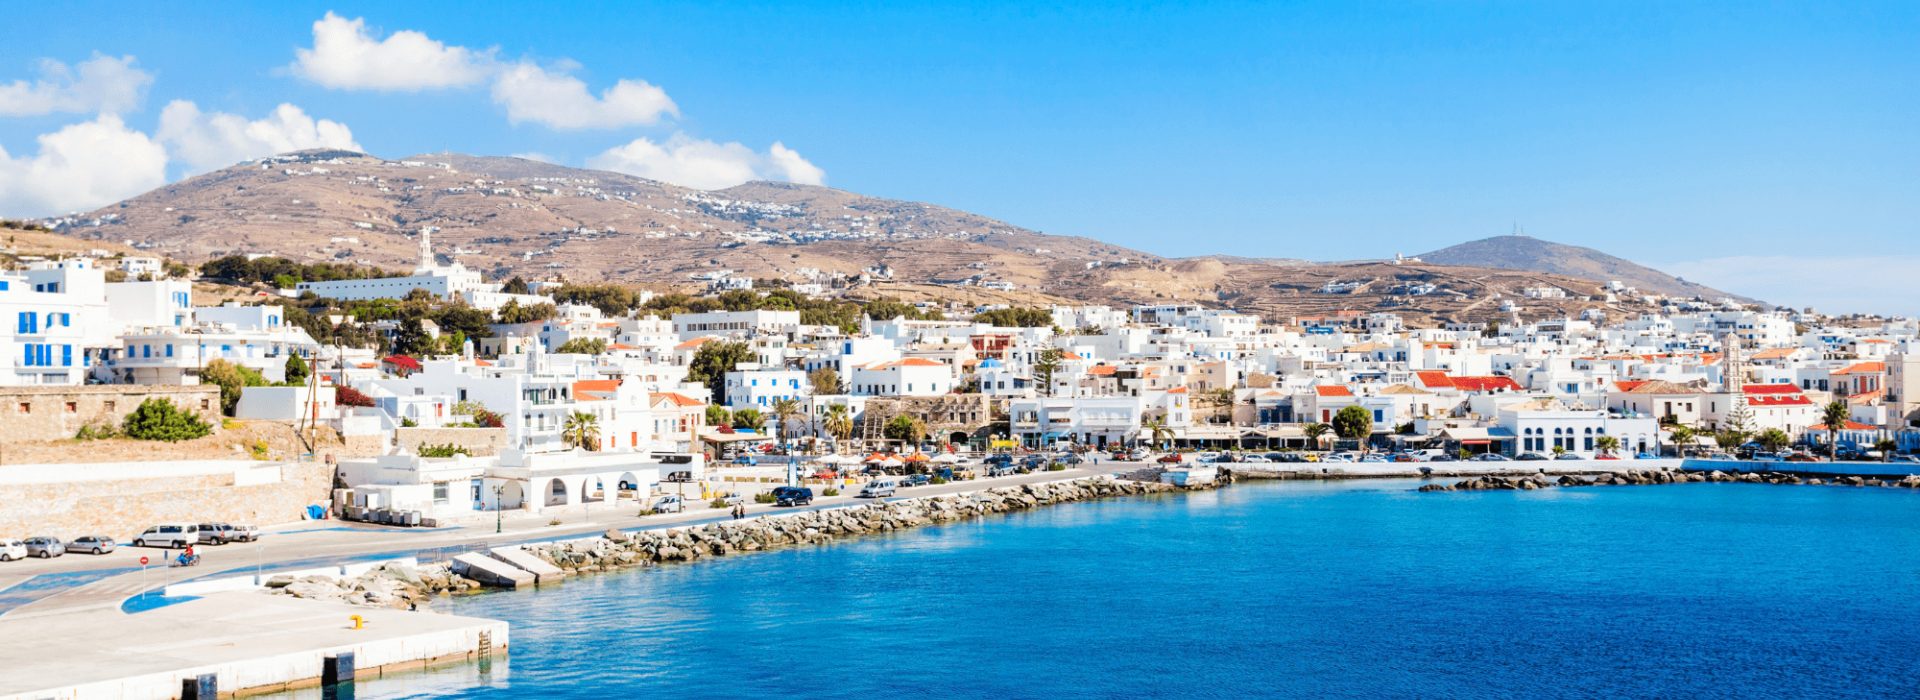 Tinos Tour - Full-Day Trip to Tinos from Mykonos - Book Now online